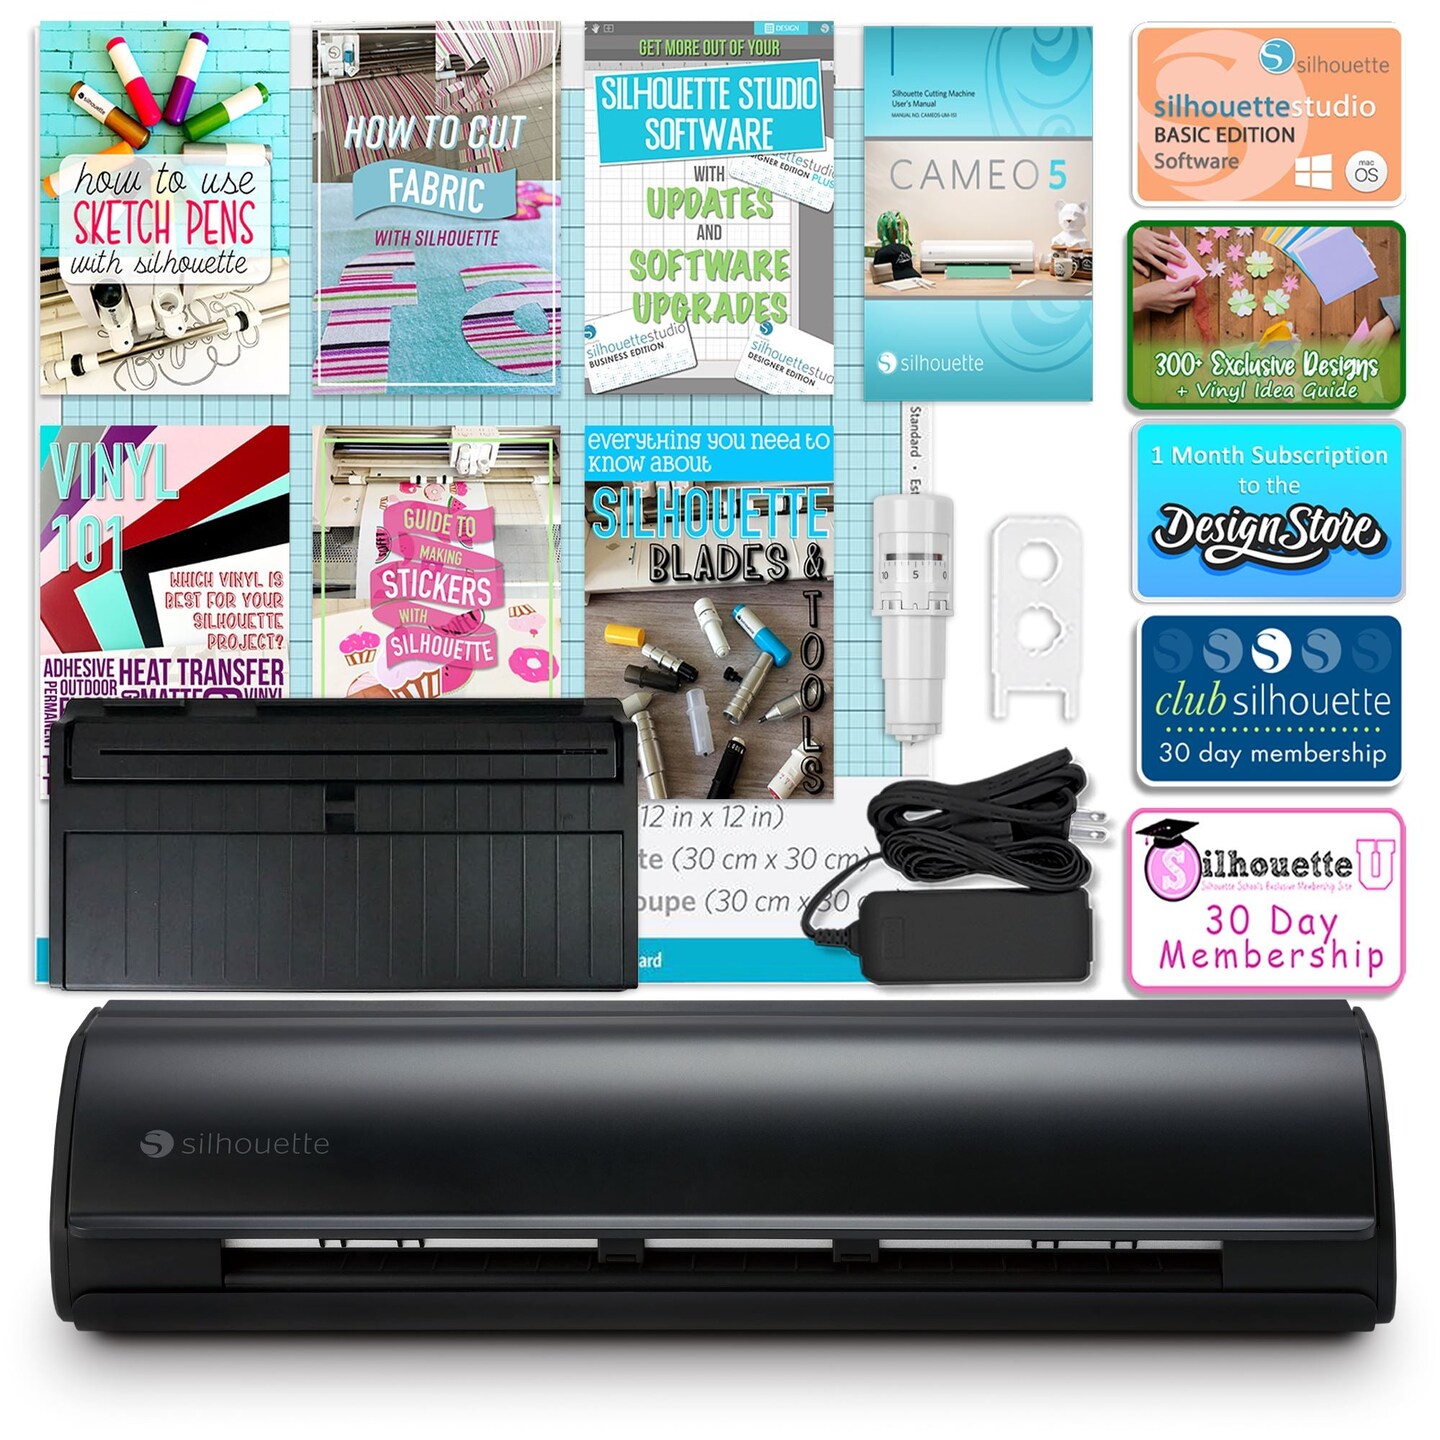 Silhouette Black Cameo 5 Business Bundle w/ Vinyl, Guides, Software, Tools